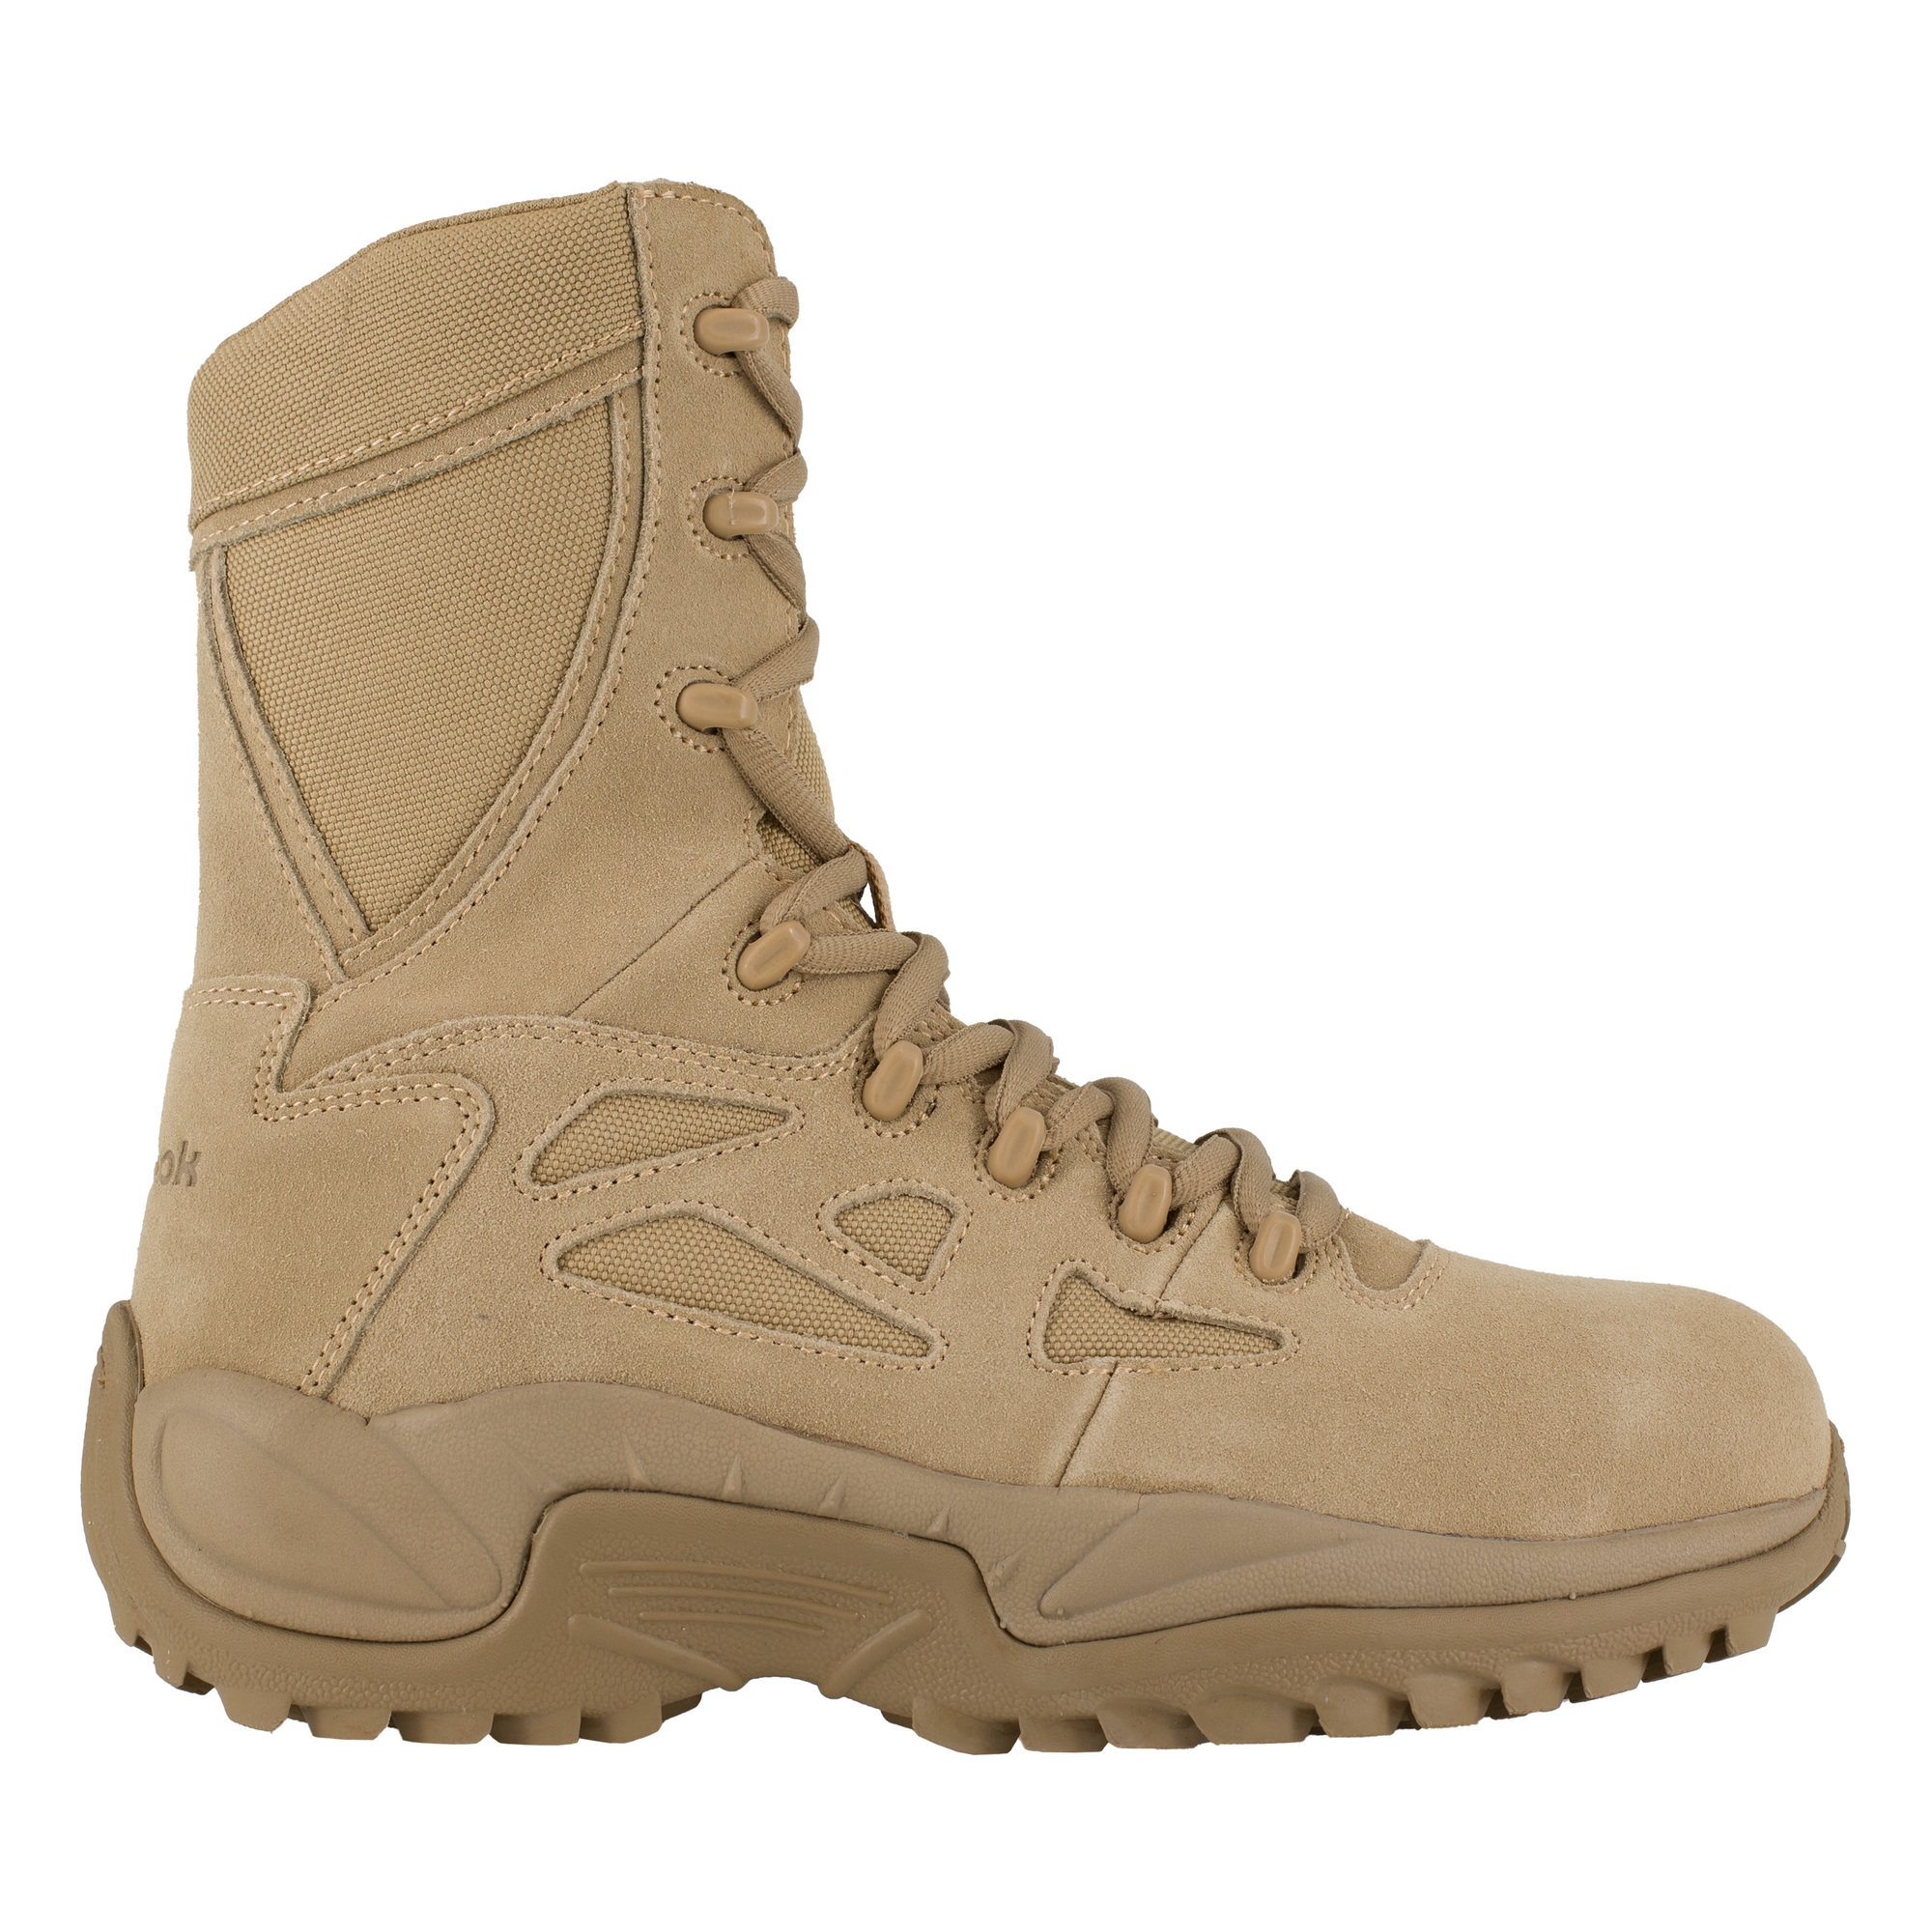 Reebok, 8Inch Stealth Tactical Boot with Side Zipper, Size 7, Width Medium, Color Desert Tan, Model RB894 -  RB894-M-07.0